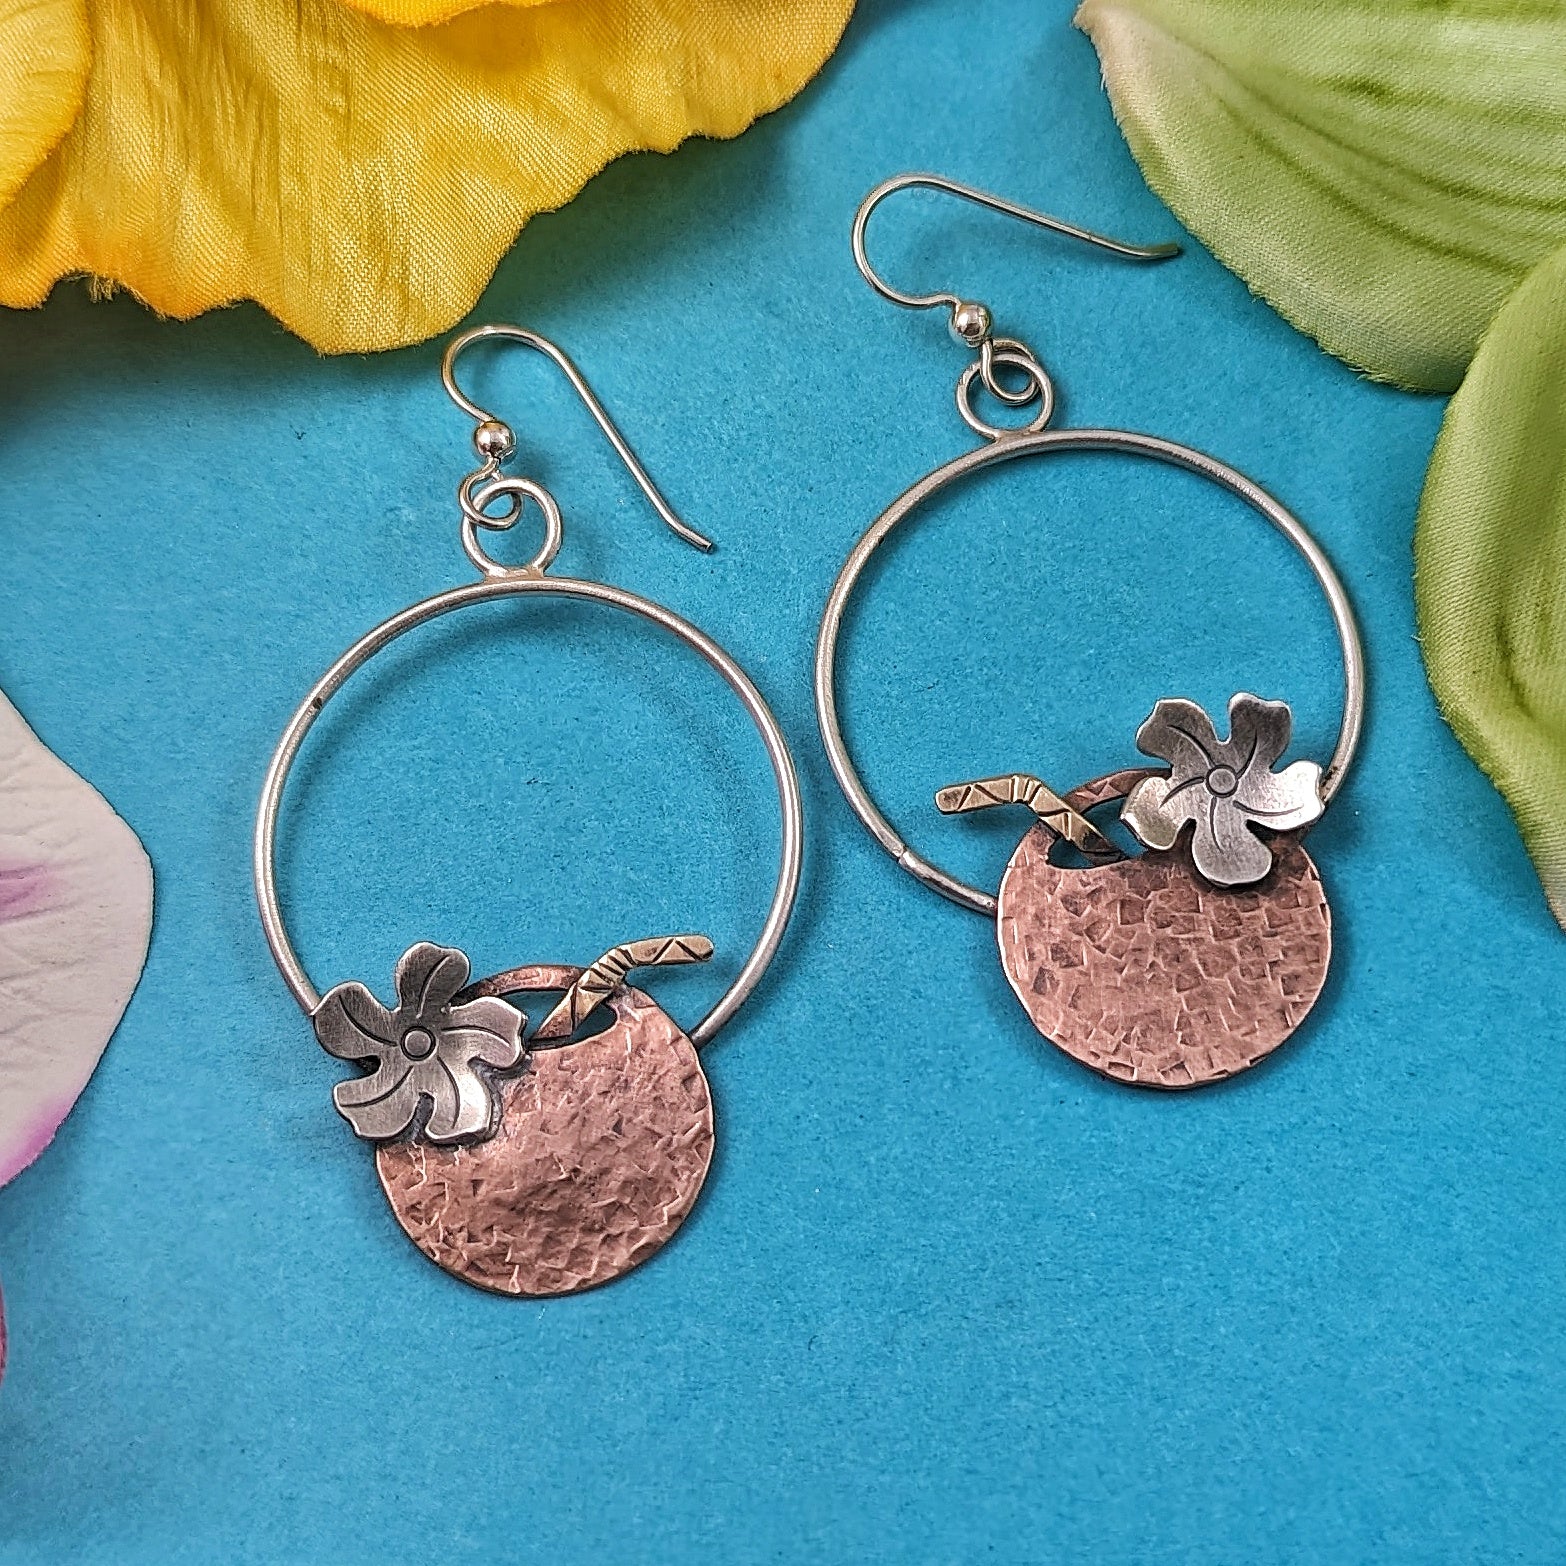 Copper coconut earrings on turquoise background